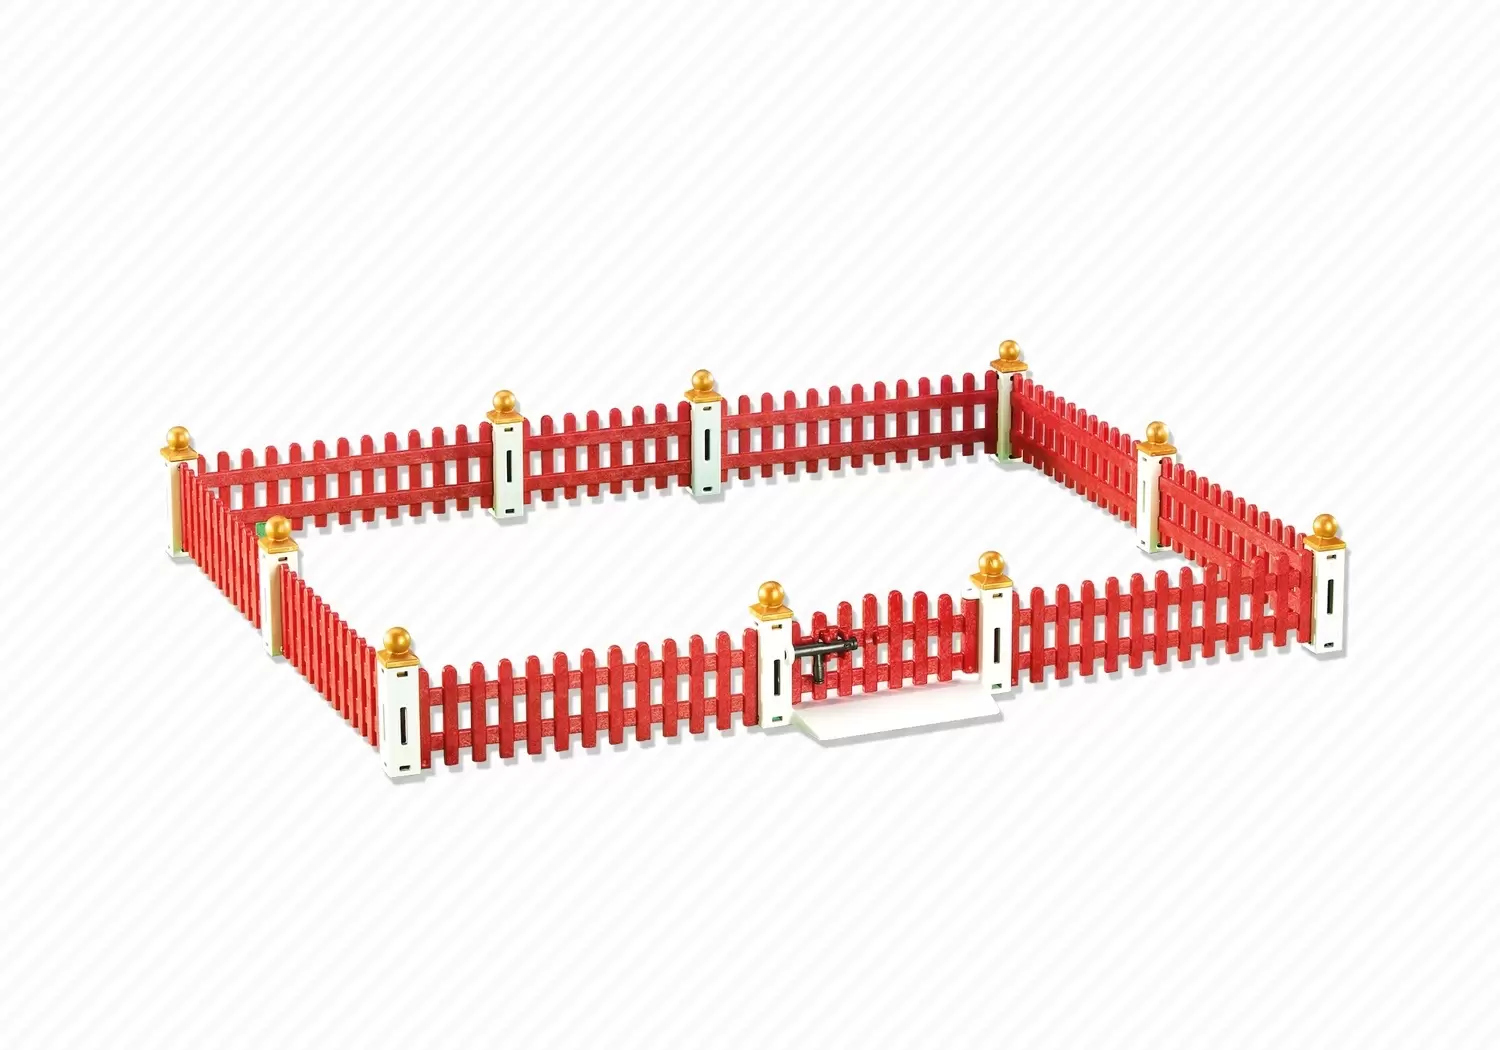 Playmobil Accessories & decorations - Fence extension for animal clinic